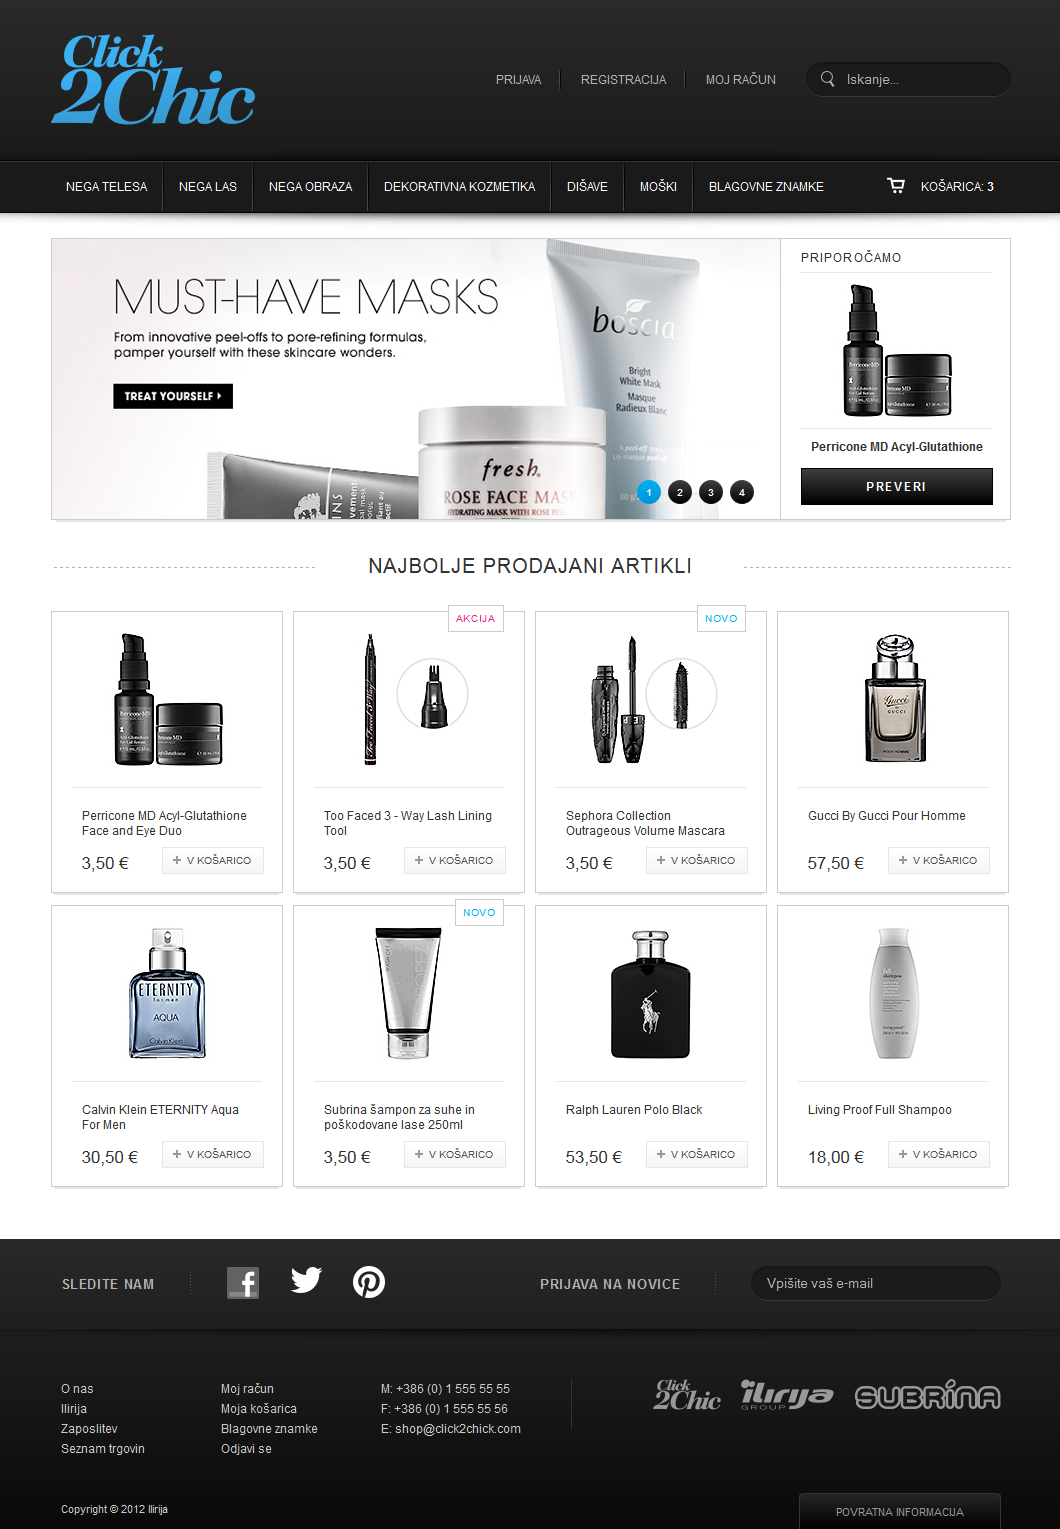 shop e-commerce brands Beauty Products White and Black skincare makeup Fragrance Responsive Design html5 mobile light clean web site Web Store